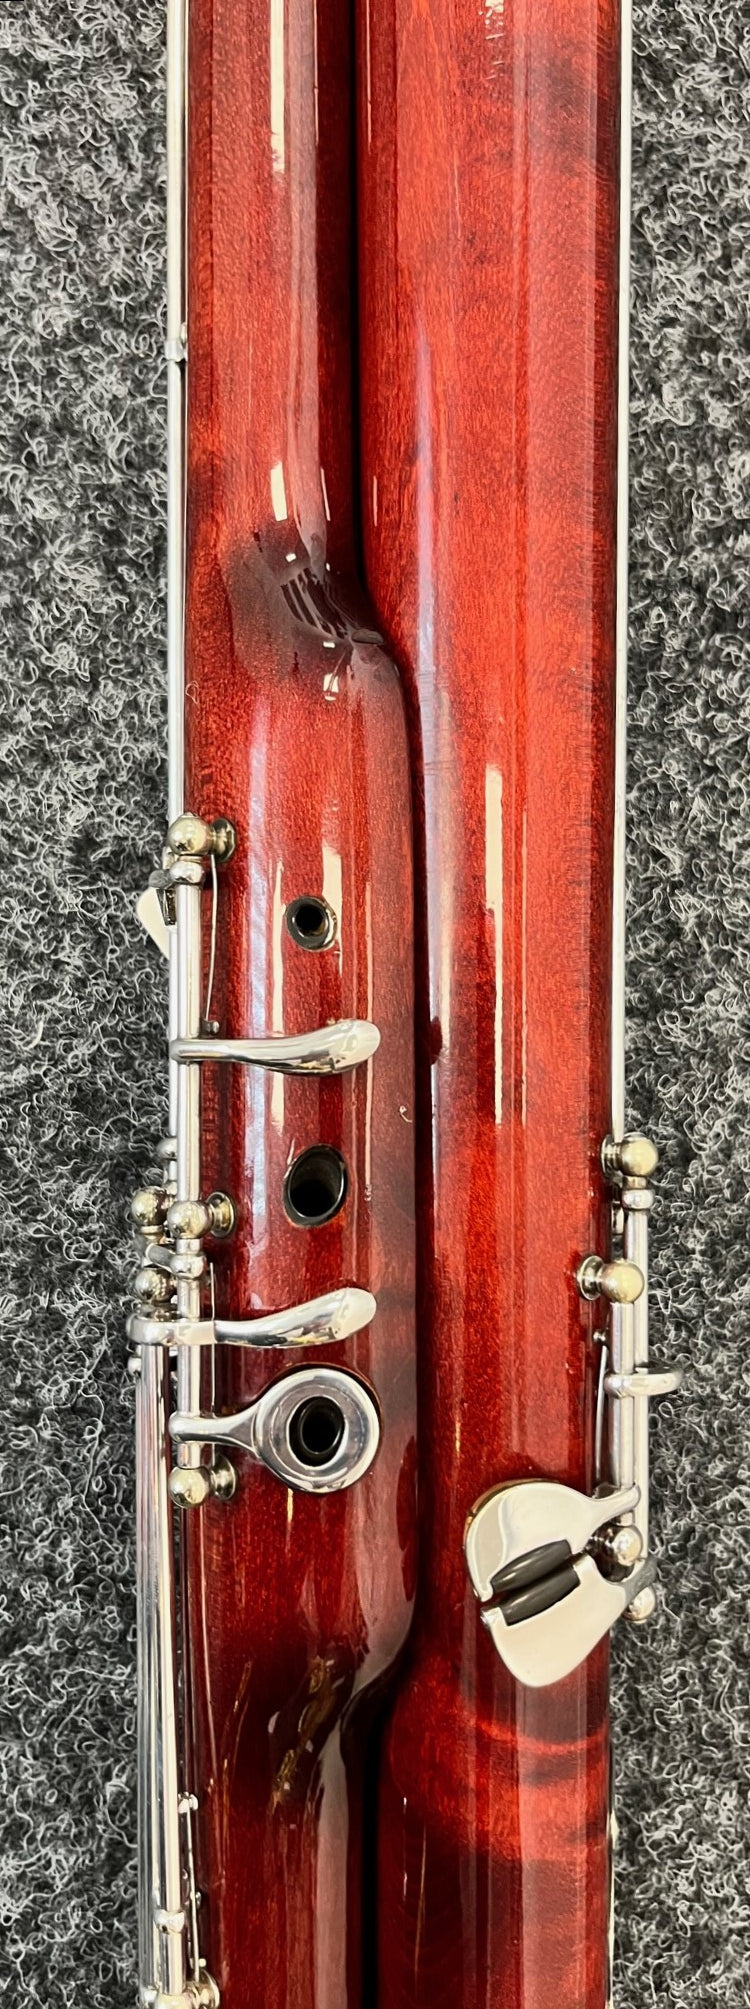 Schreiber Professional Model Bassoon (pre-owned)